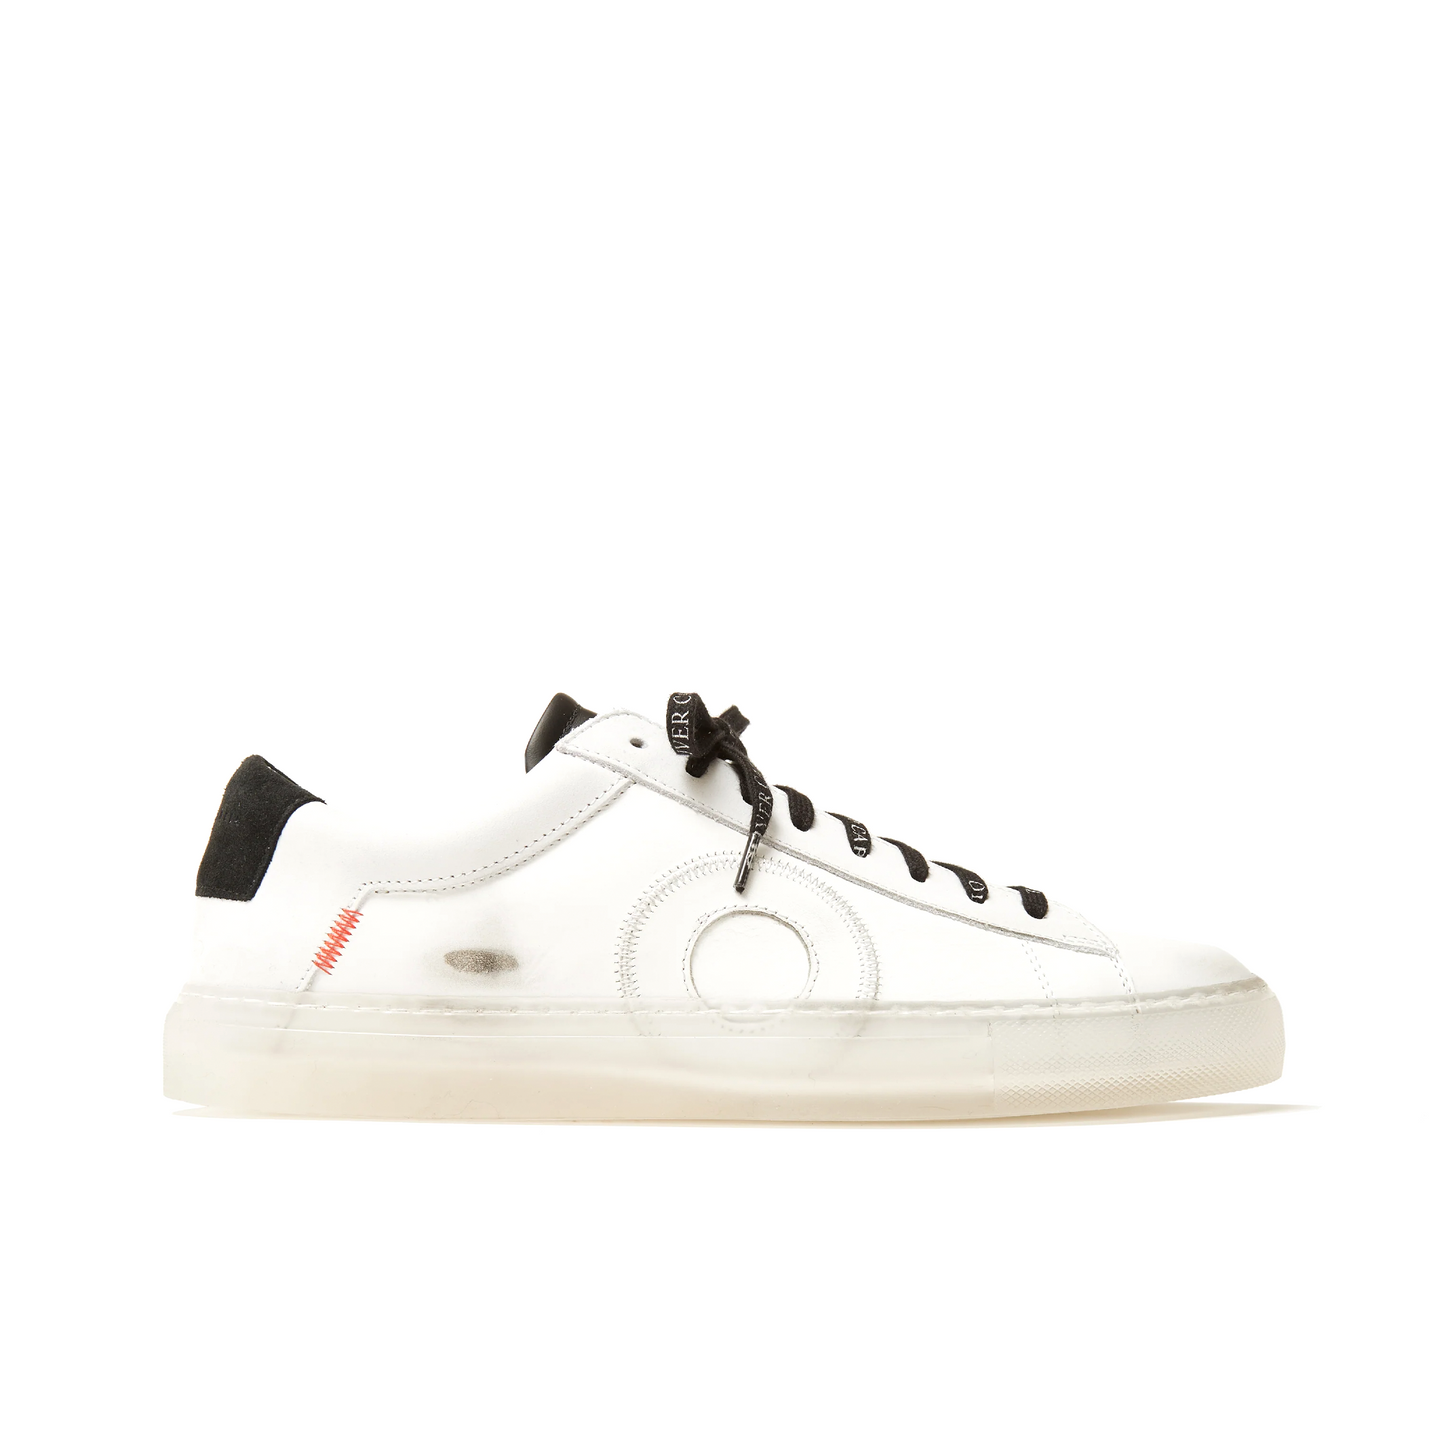 OLIVER CABELL LOW 1 UNISEX SNEAKER